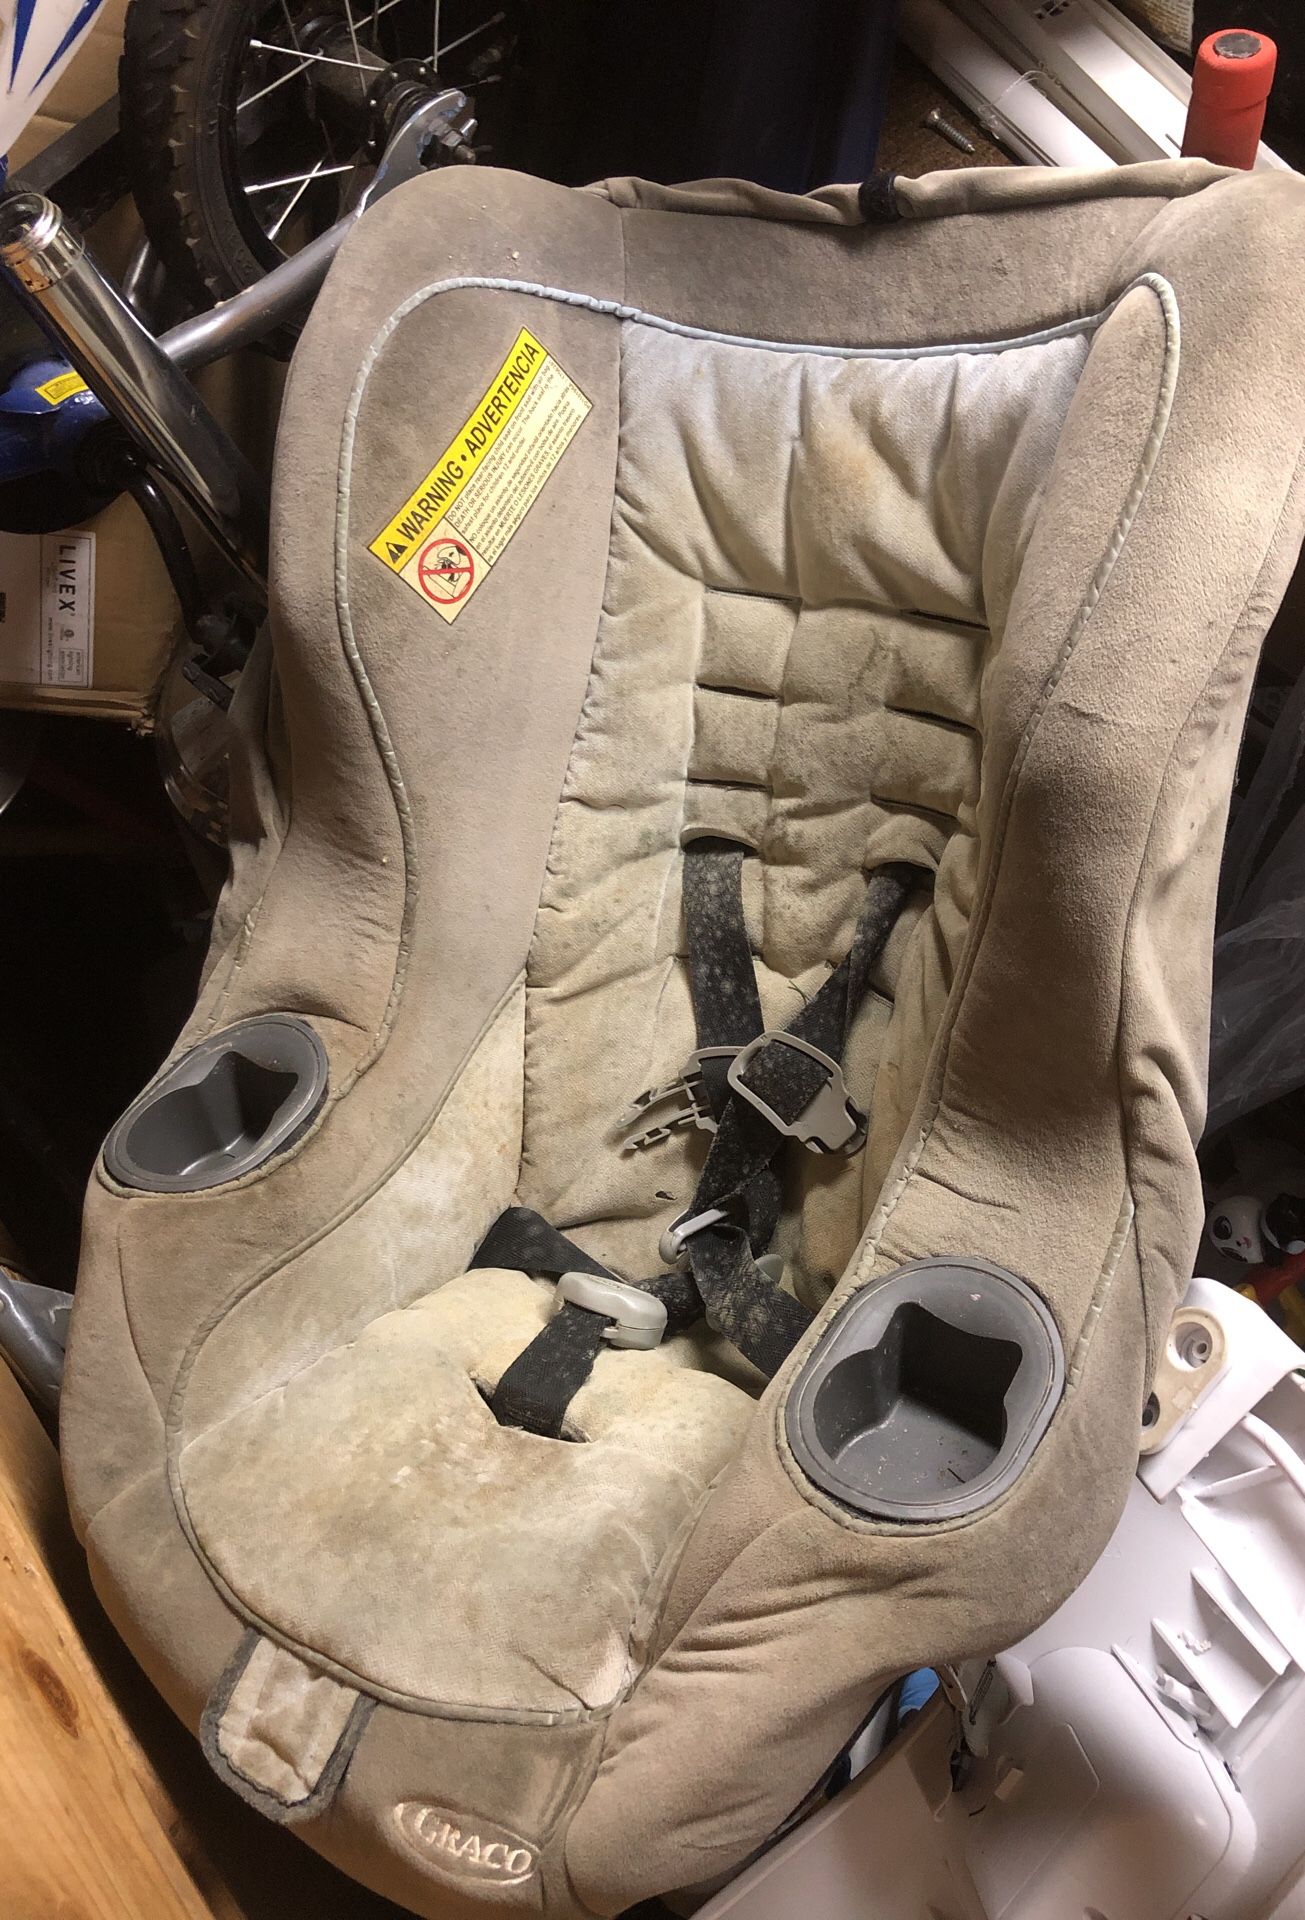 Graco car seat needs cleaning BEST Offer takes